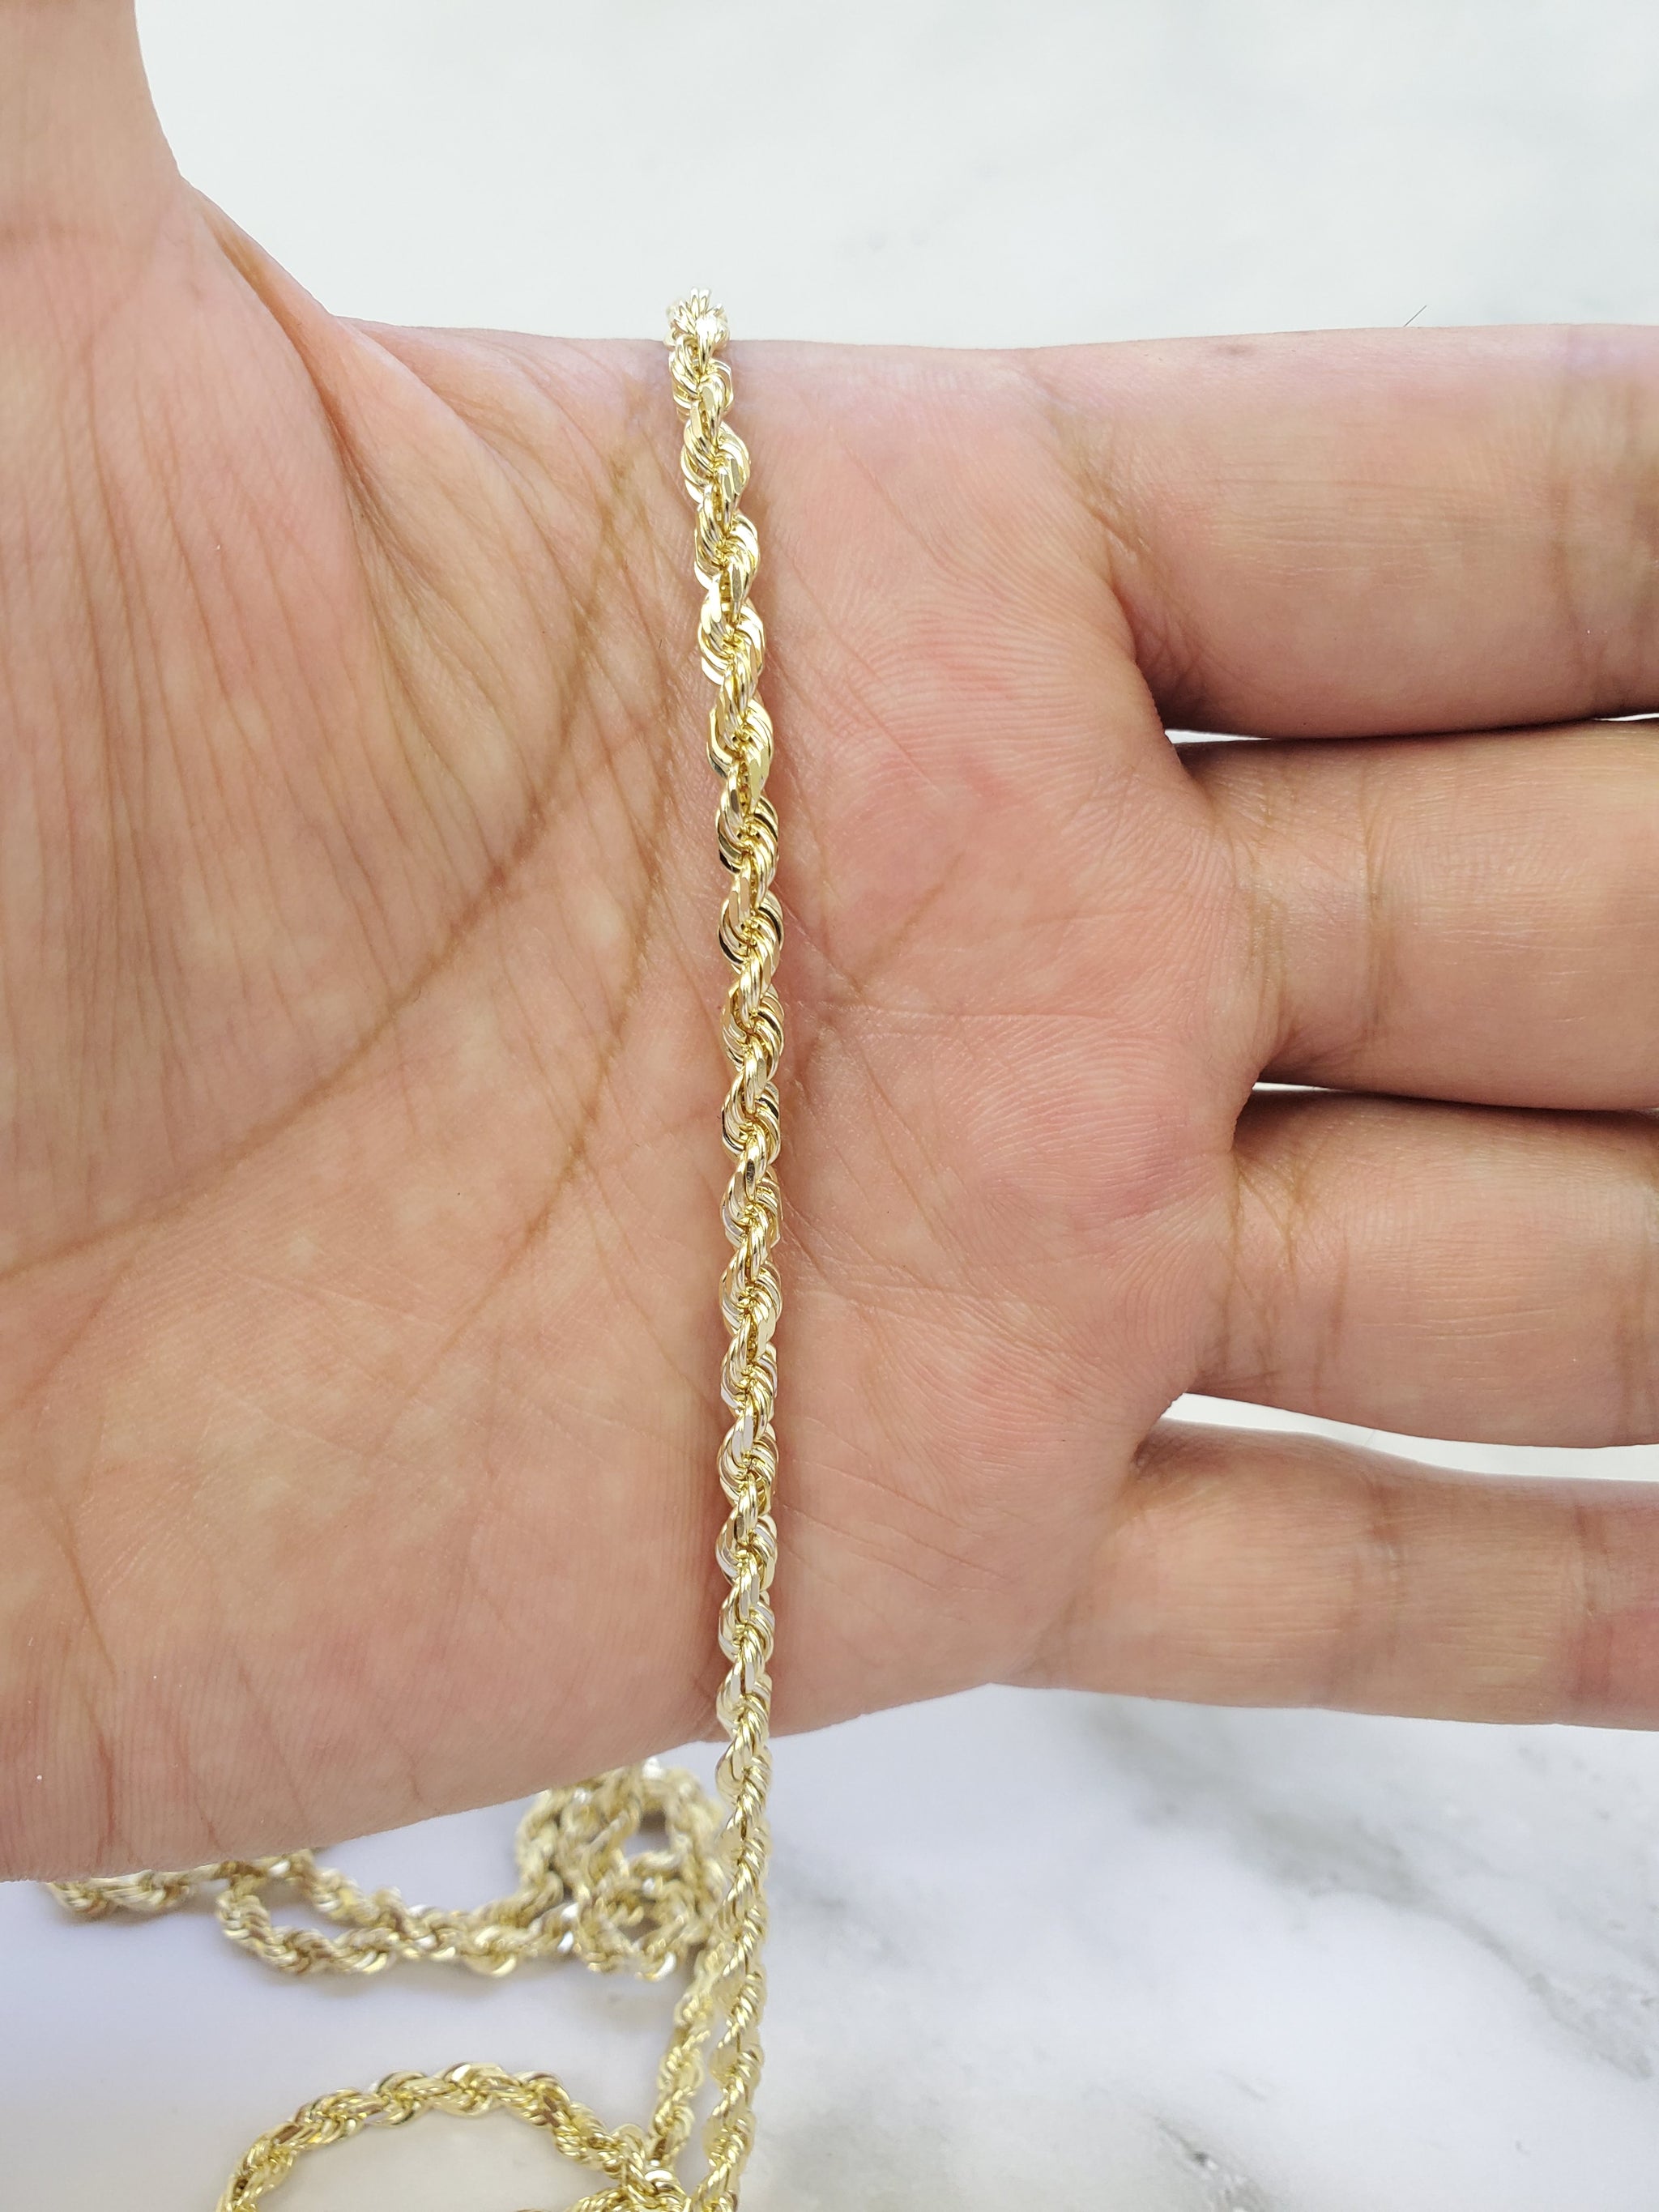 14K Yellow Gold Diamond Cut Rope Chain Real Solid 16 to 26 (2.5mm-5mm) 2.5MM-20